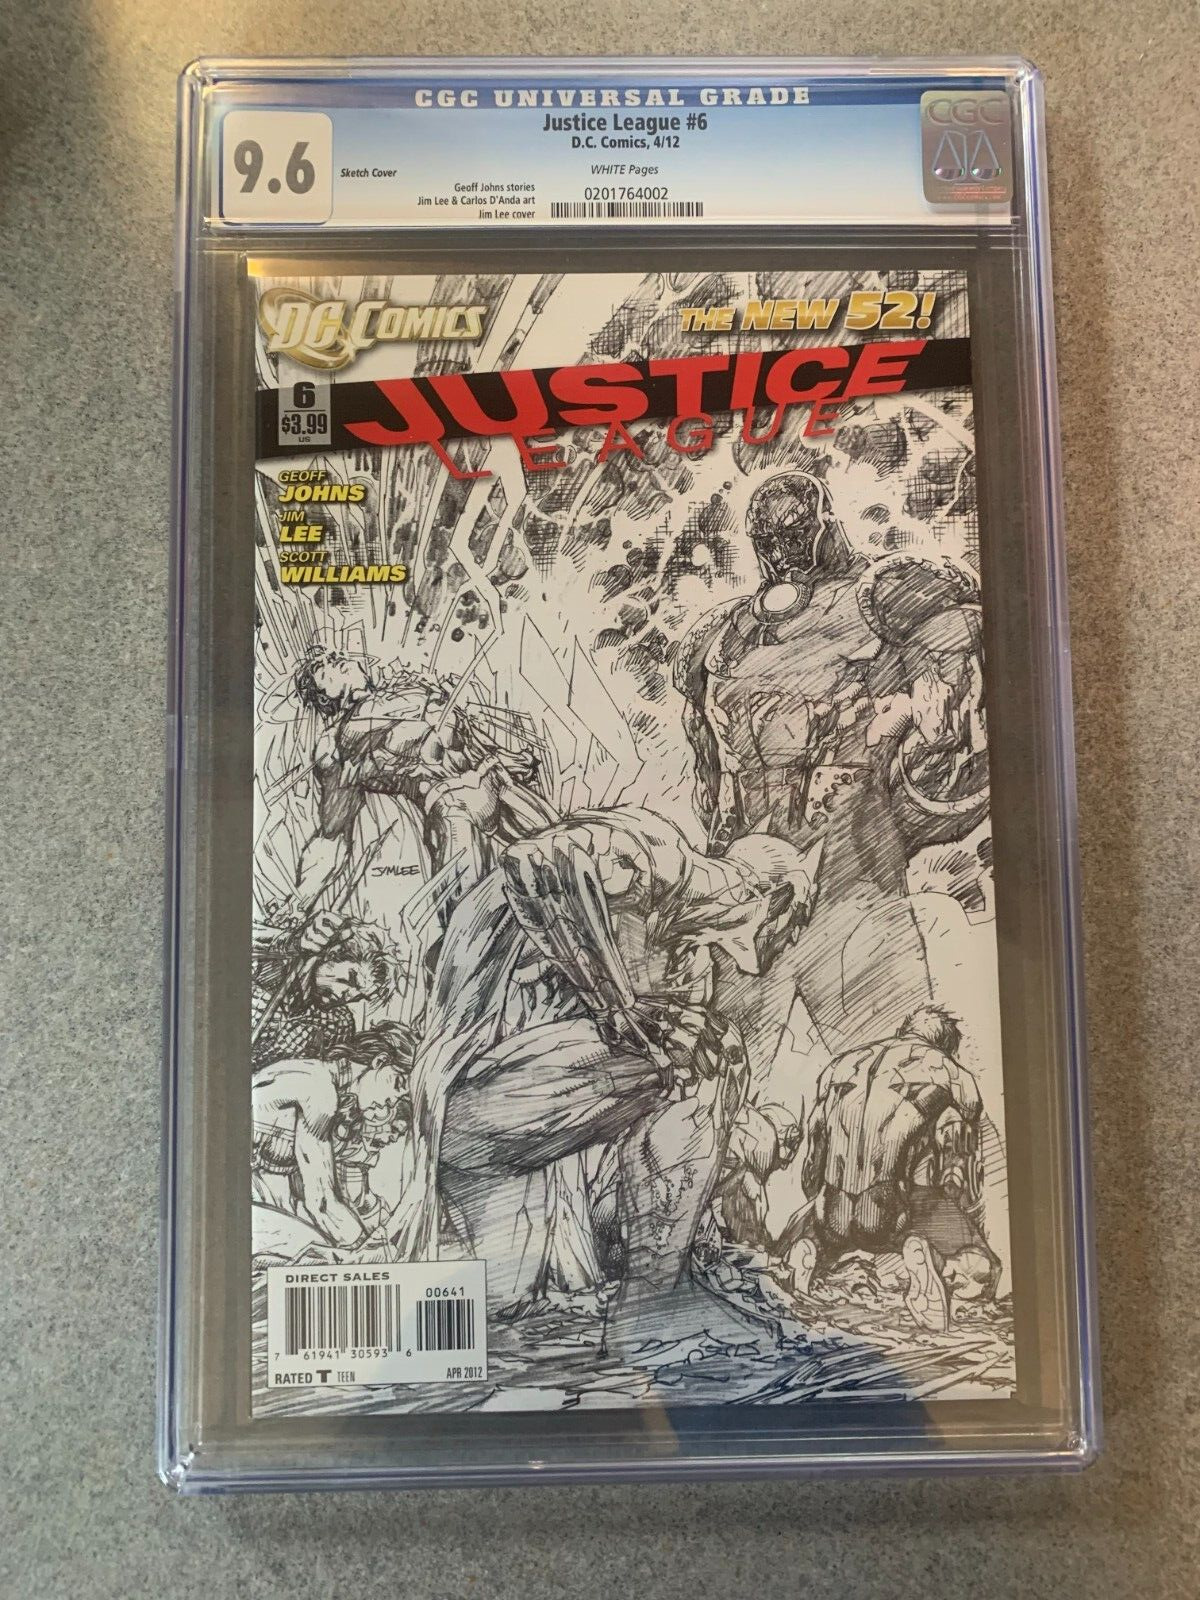 Justice League #6 - Apr 2012 - Limited 1:200 Incentive Sketch Variant - CGC 9.6